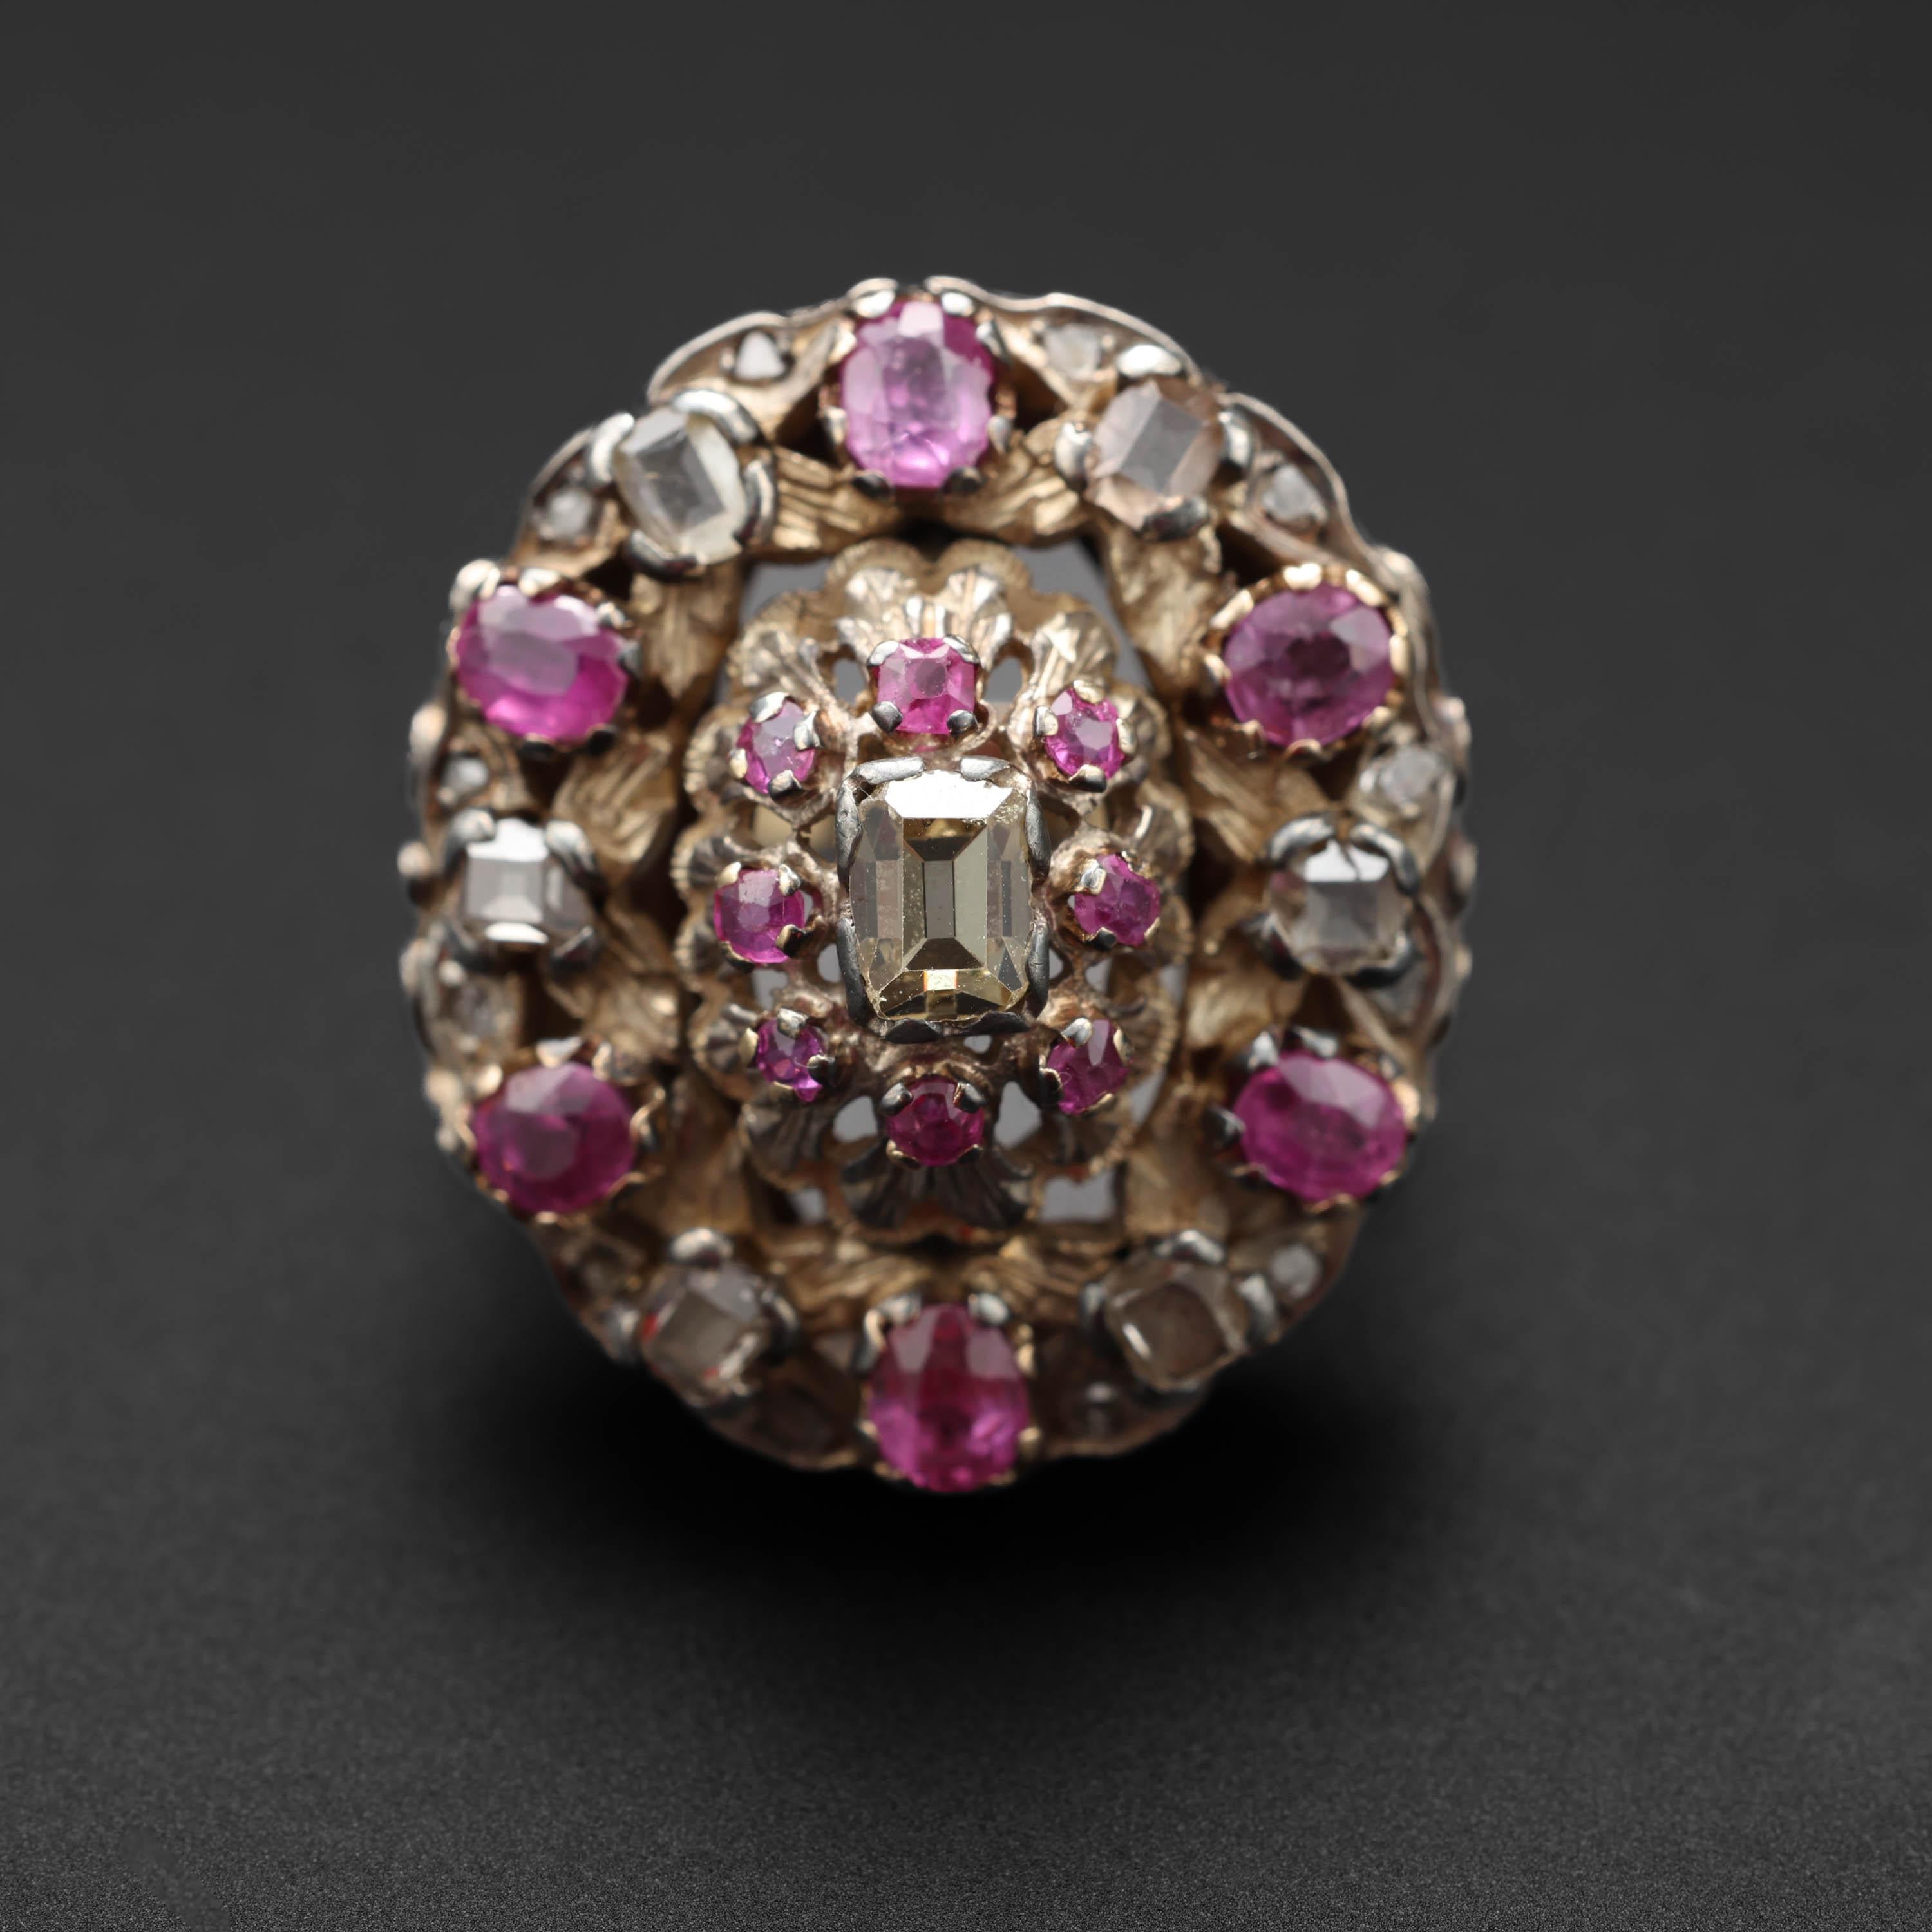 This Georgian-era (circa 1830)  ruby and table-cut diamond ring was created entirely by hand over two-hundred years ago, though the shank itself is more recent (though still antique). 

This impressive and rear ring features central table-cut